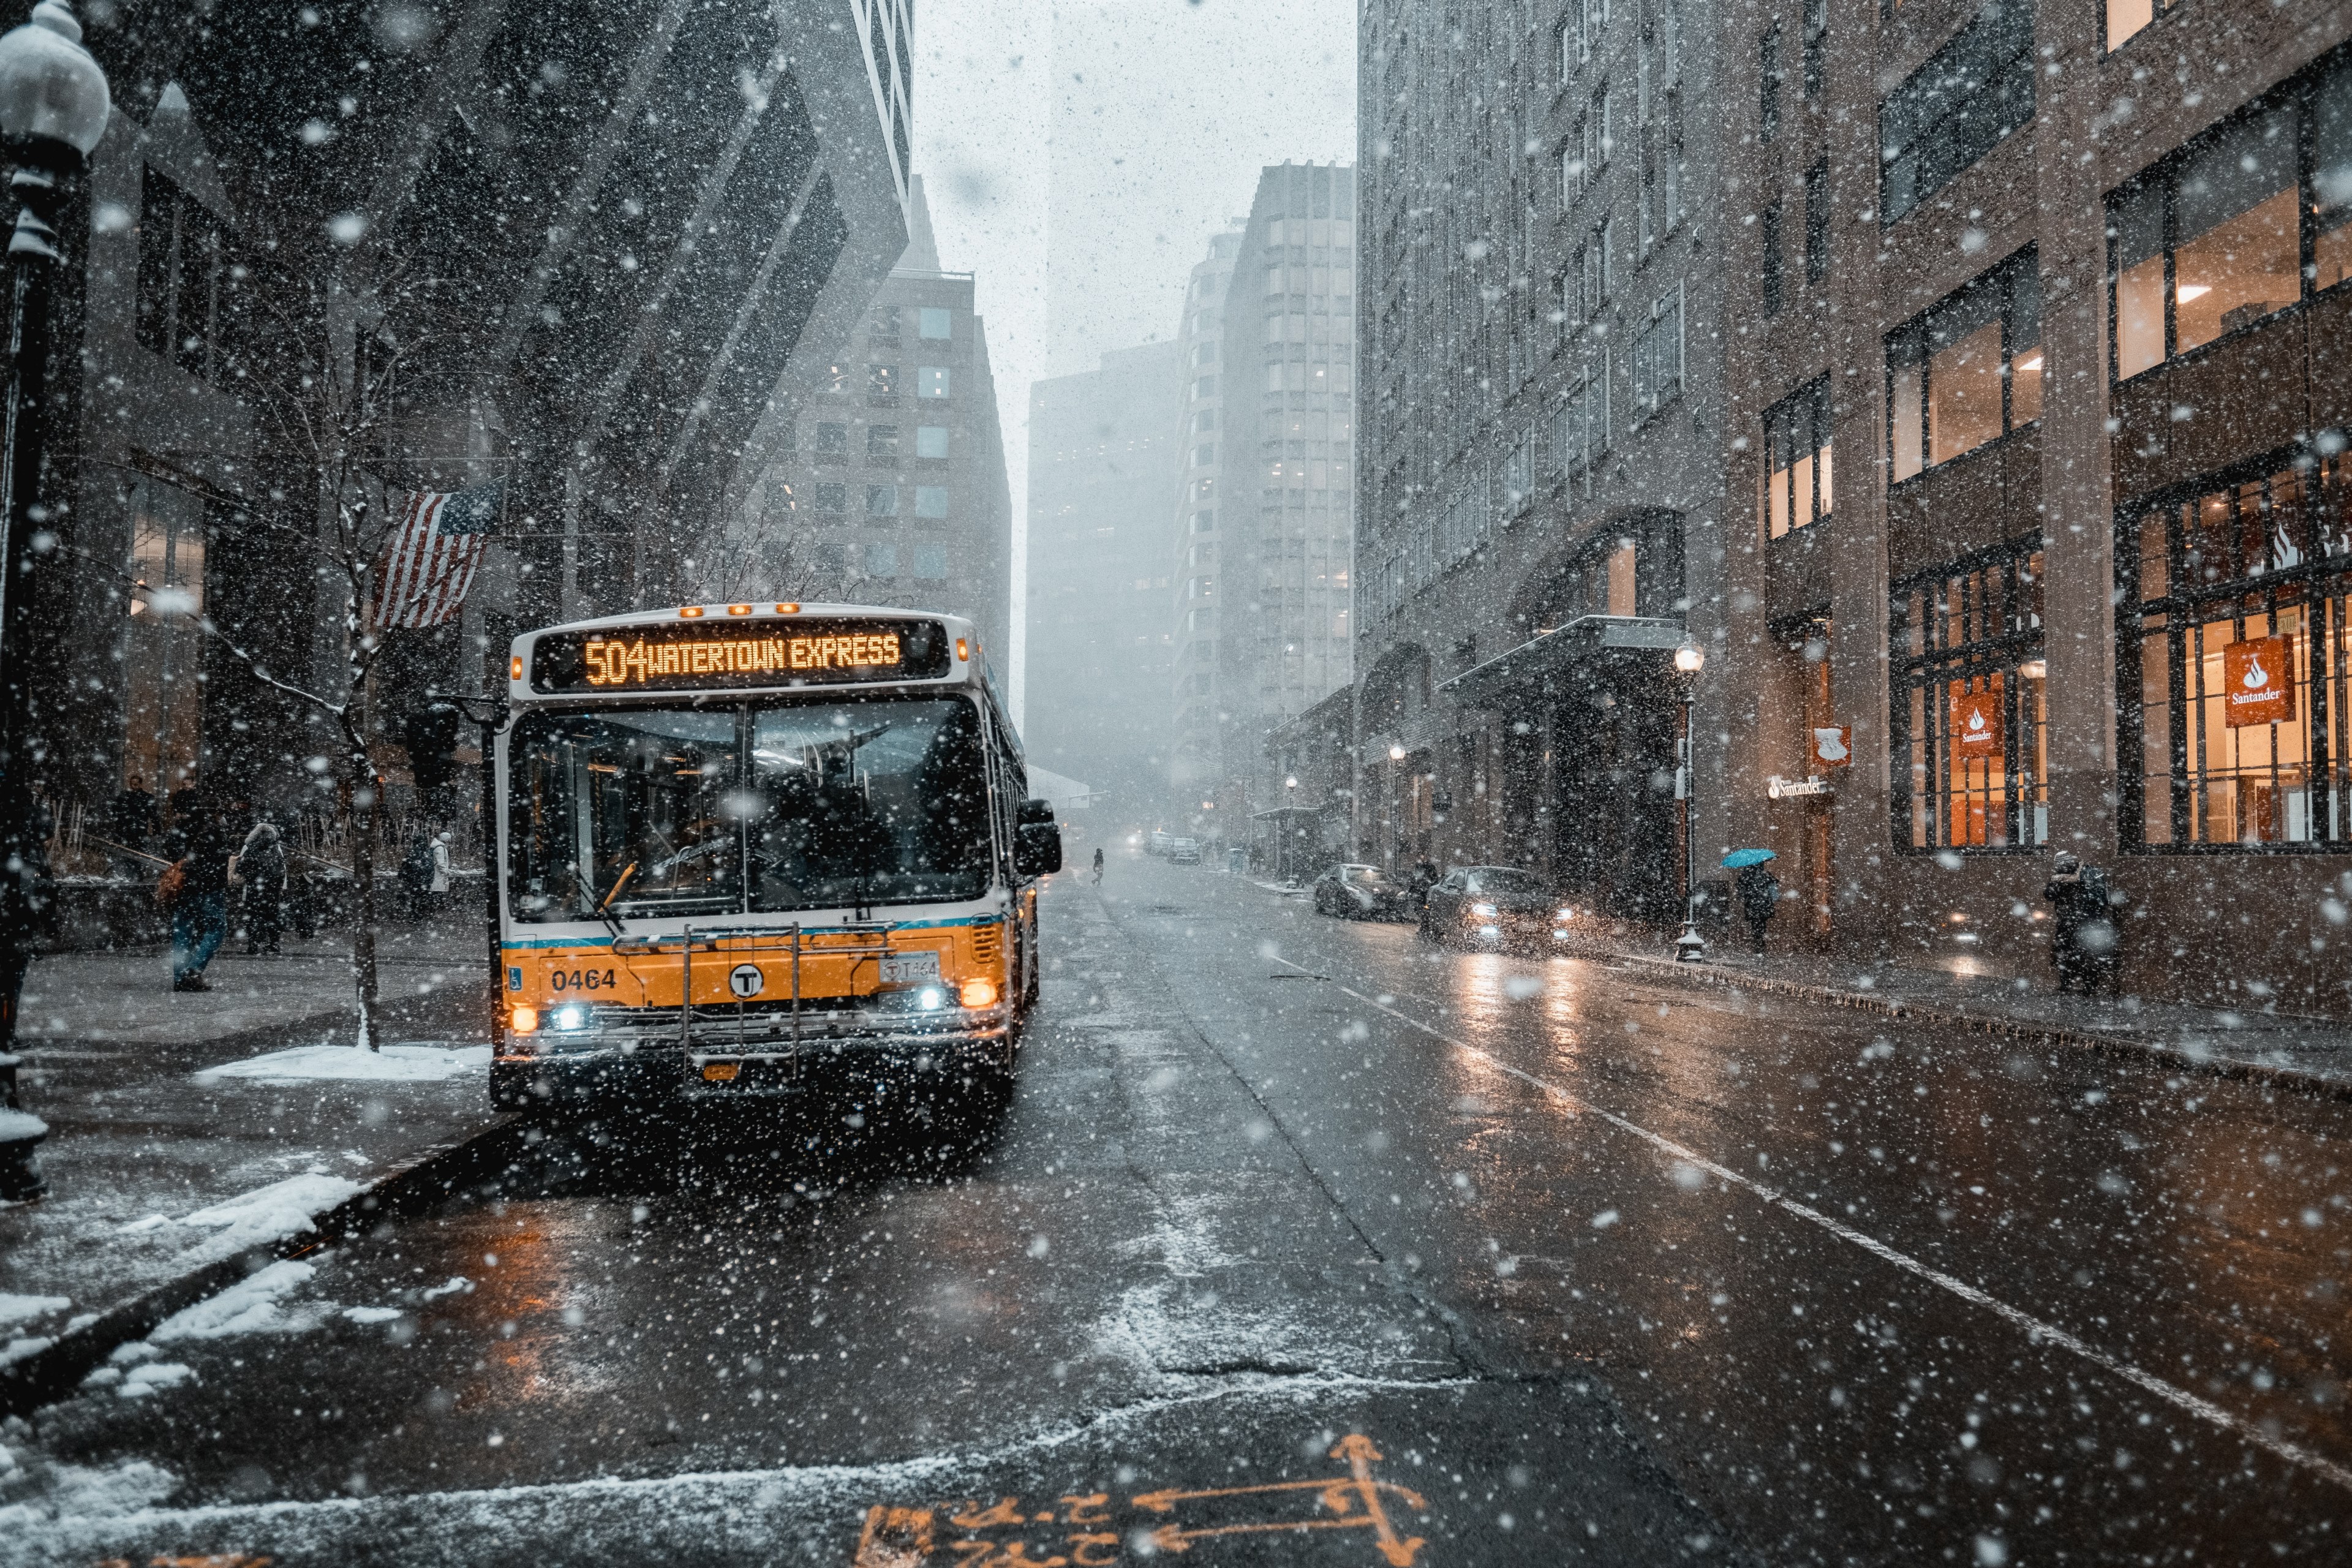 Wallpaper / a bus driving down the road in a populous city during a winter snowfall, city bus in winter 4k wallpaper free download